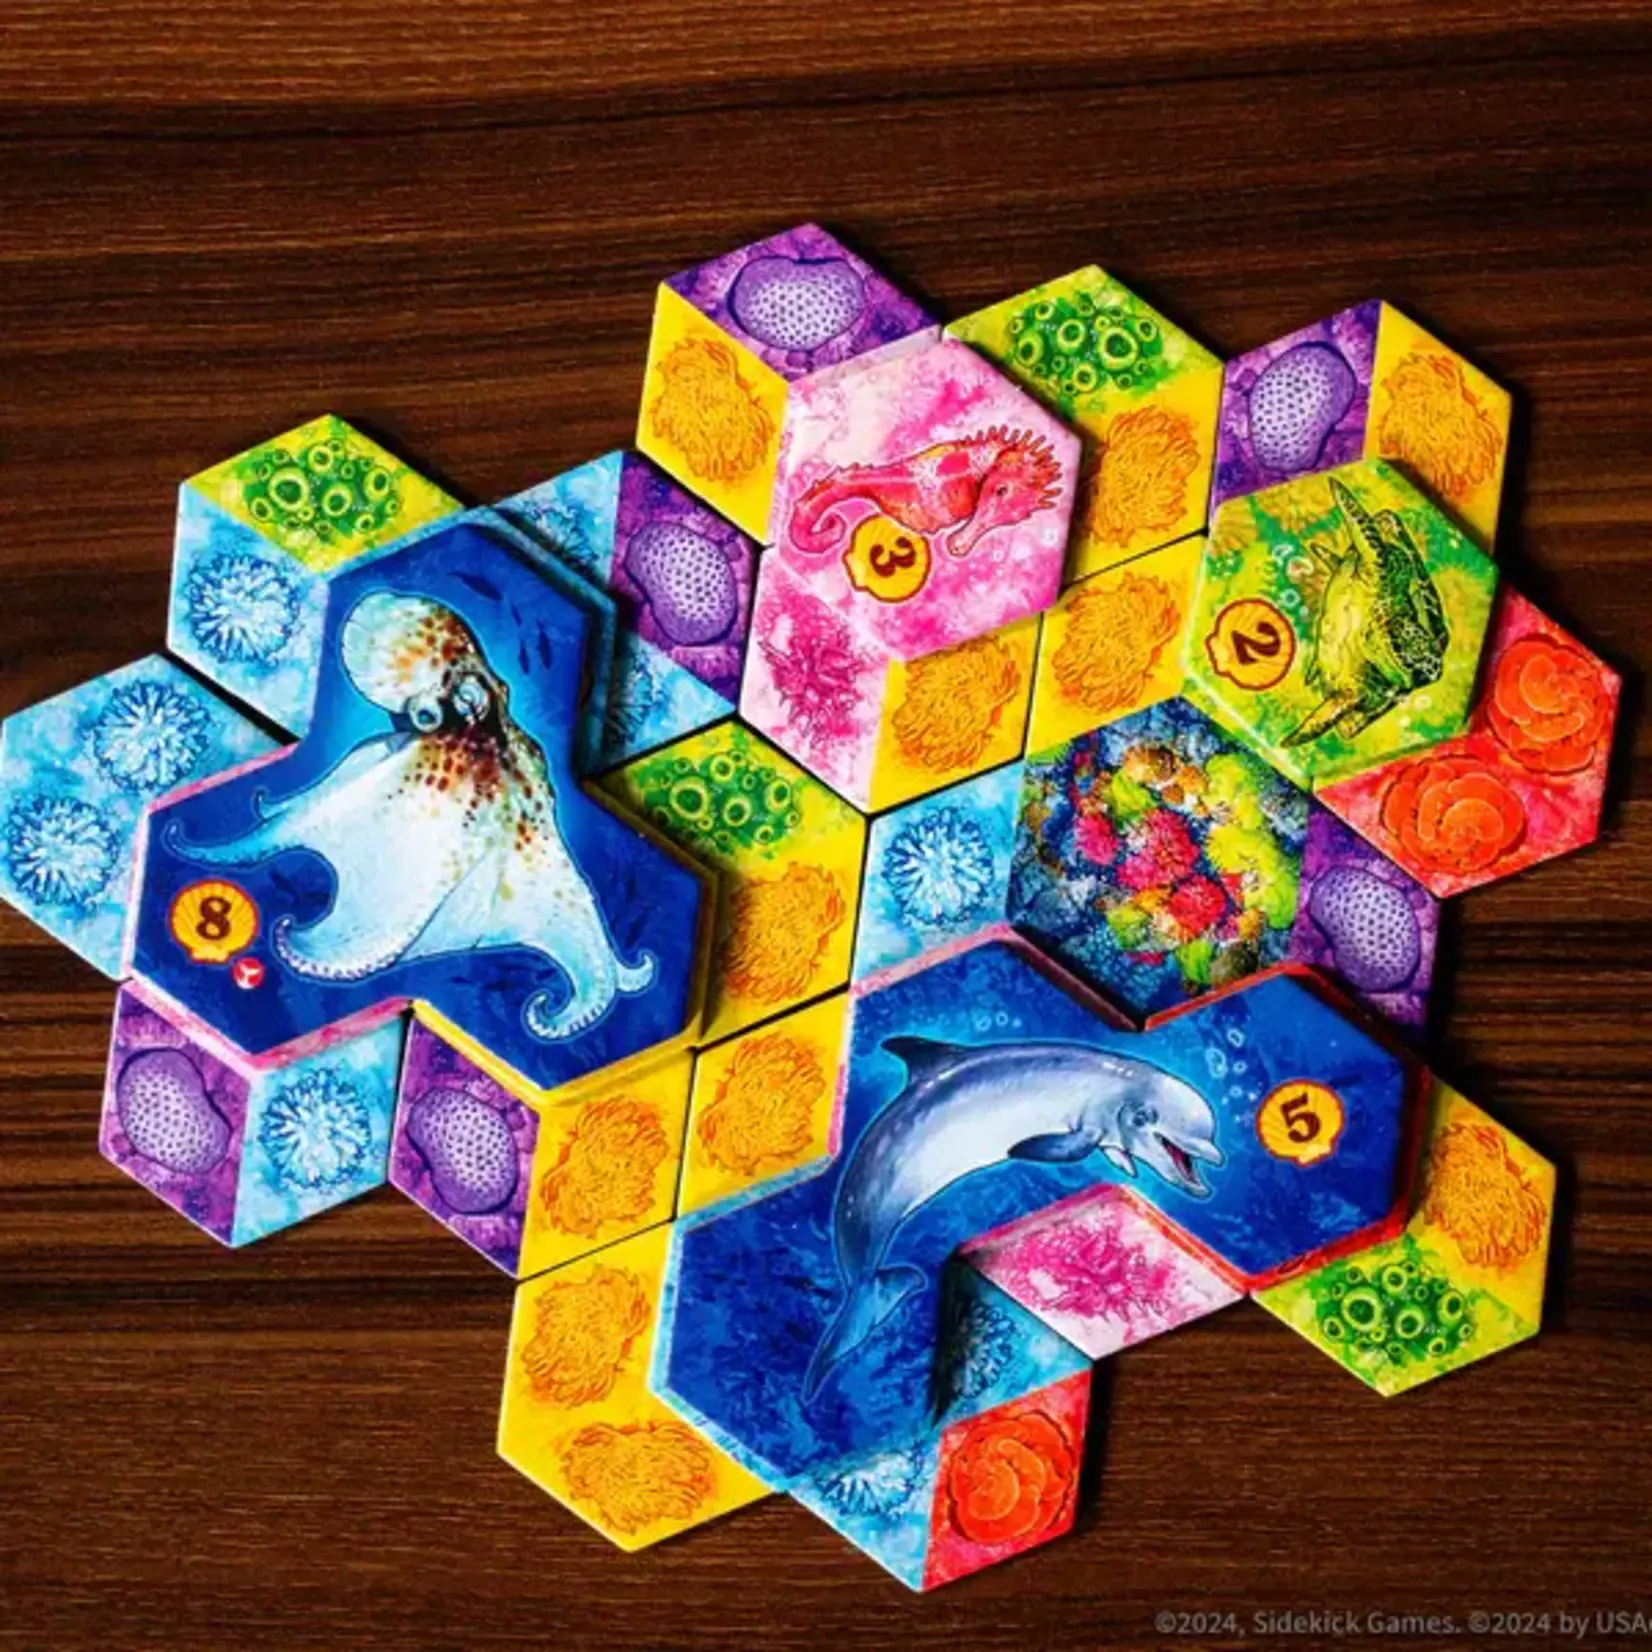 The Op Games | usaopoly AQUA: Biodiversity in the Oceans